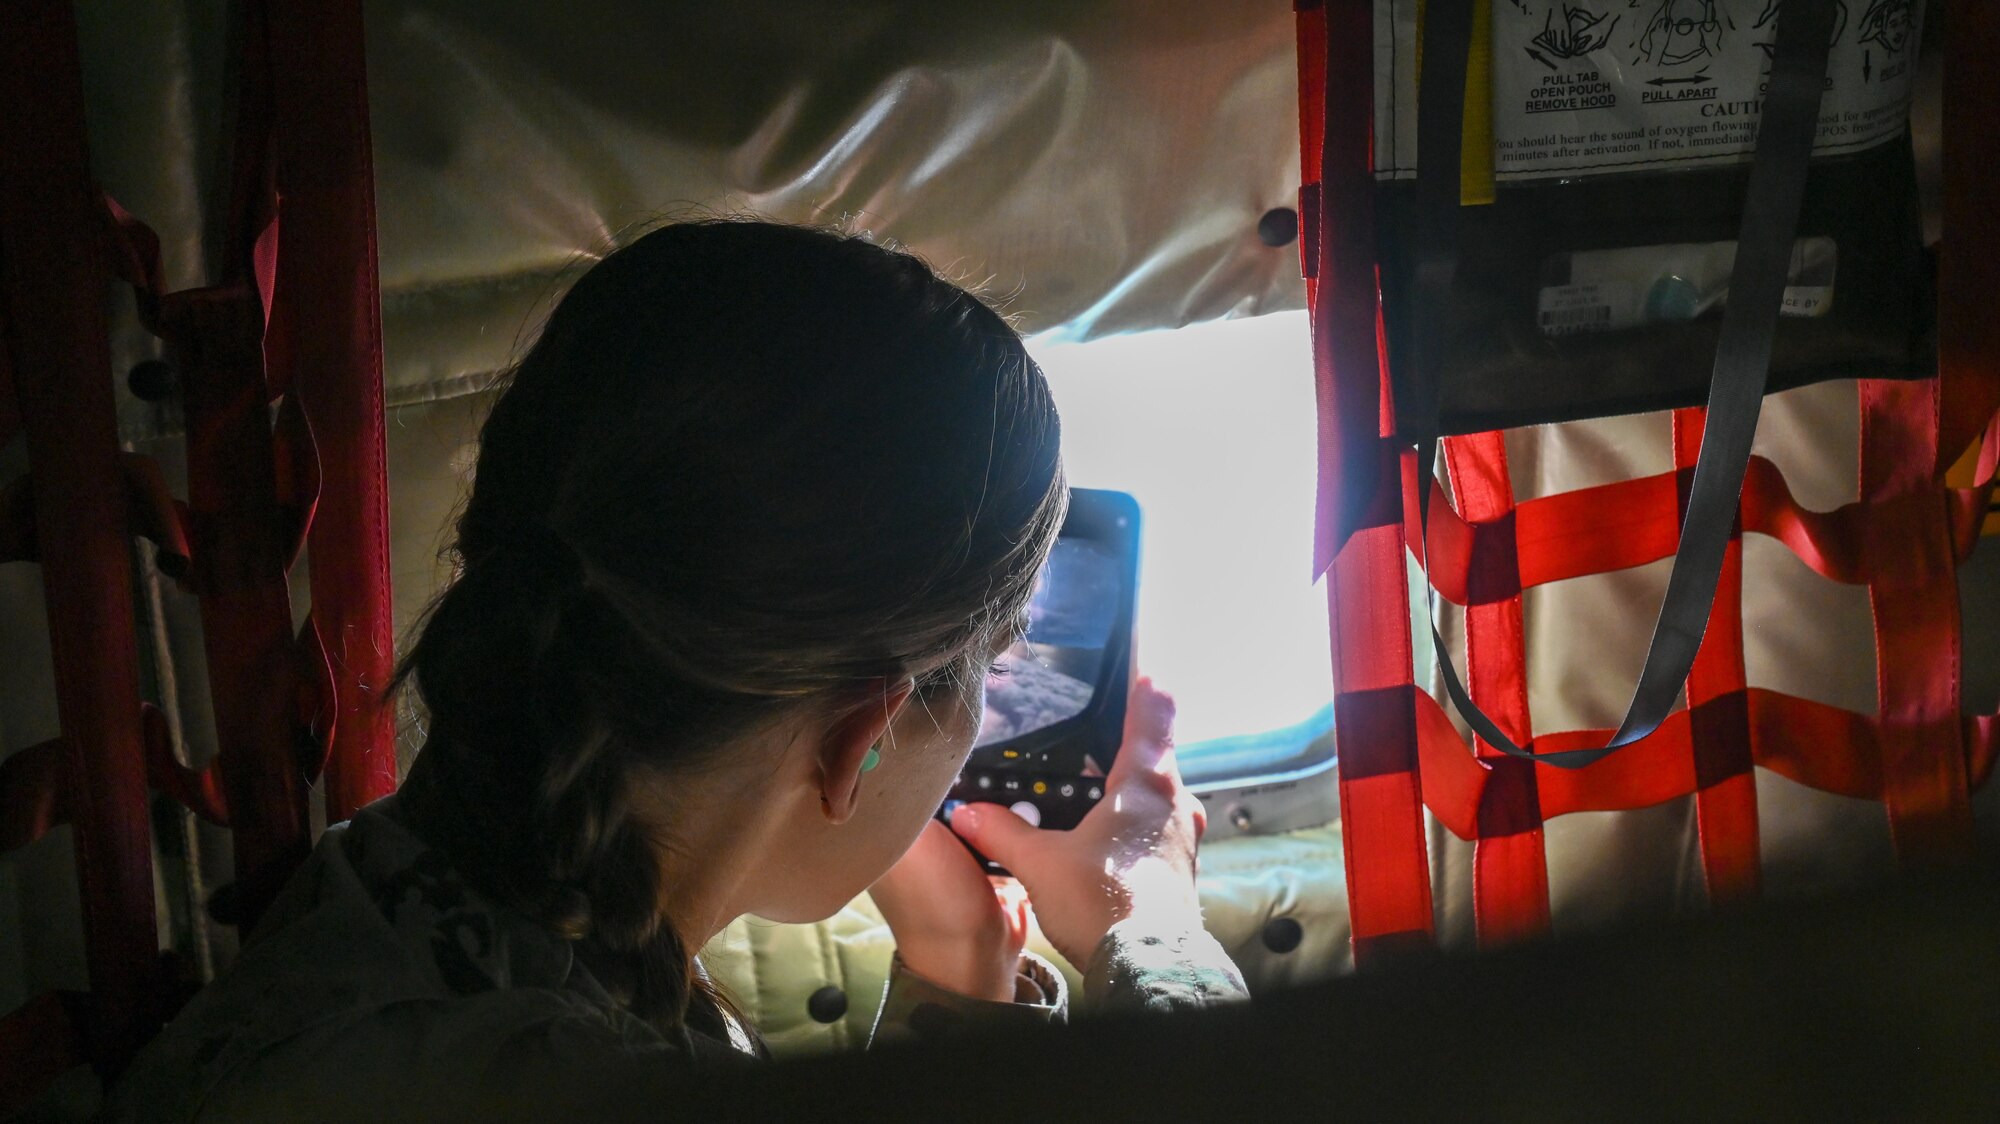 An airman looks out the leftside of a window of a KC-135 taking a photo with her phone.